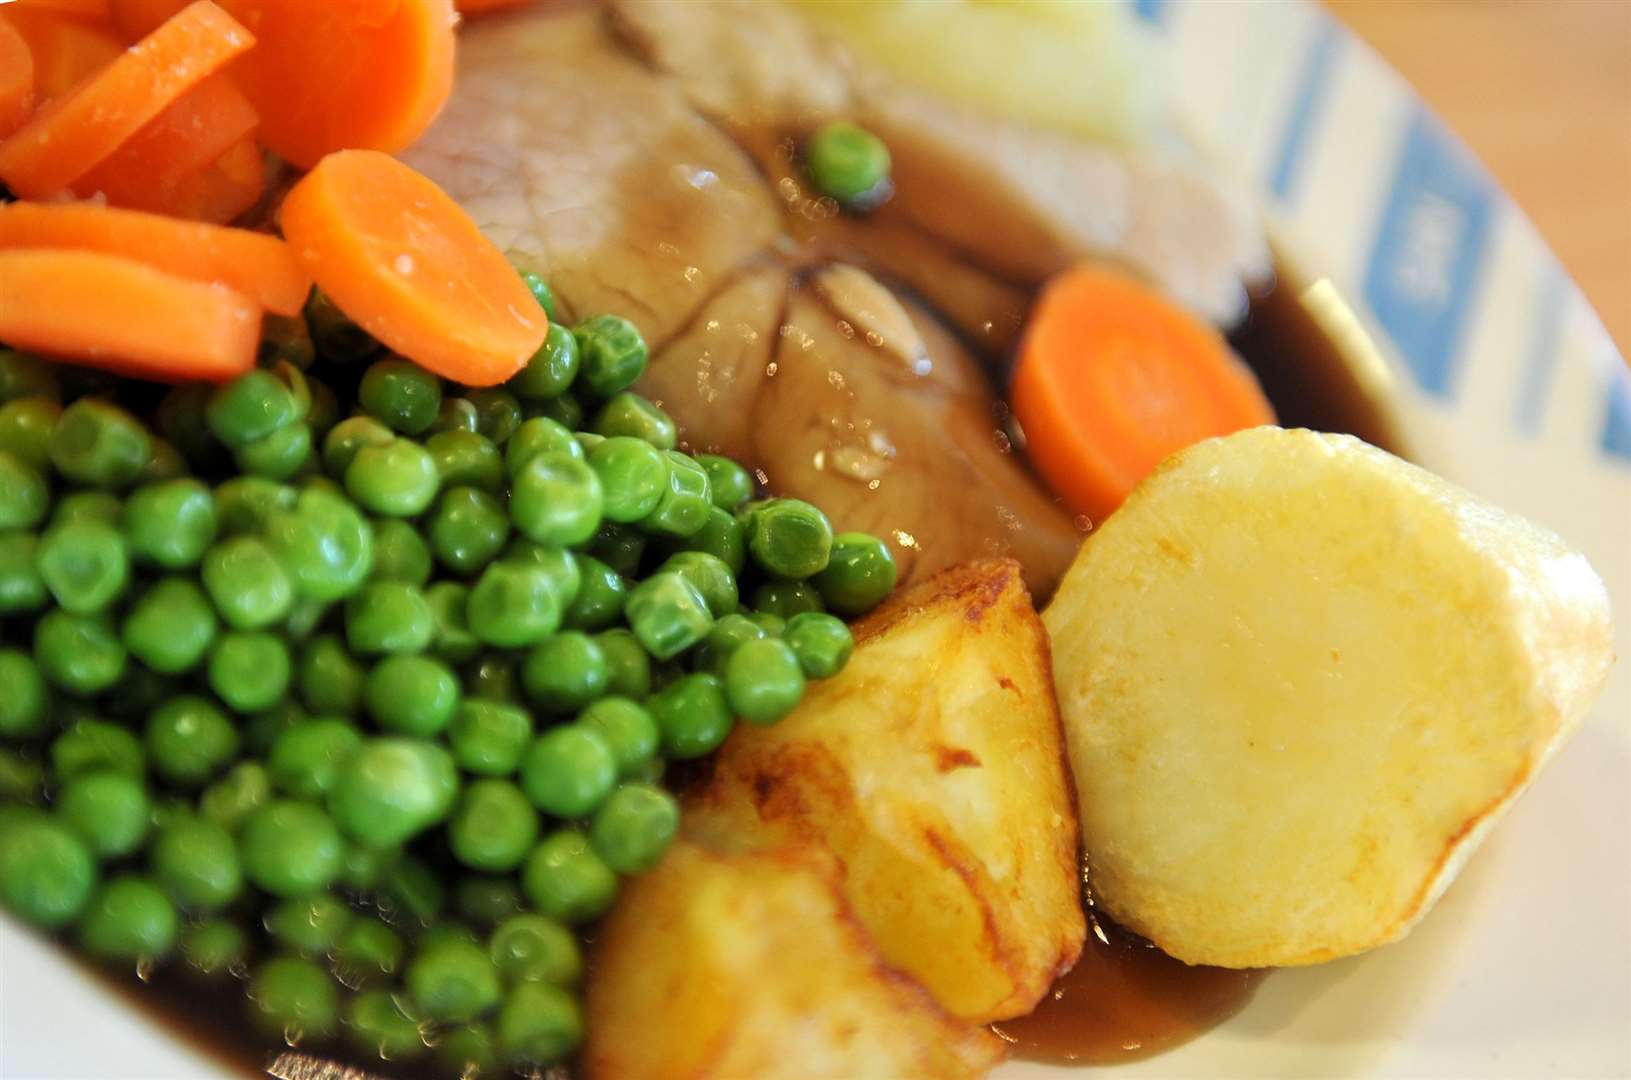 Hospital food is set for an upgrade under new government plans